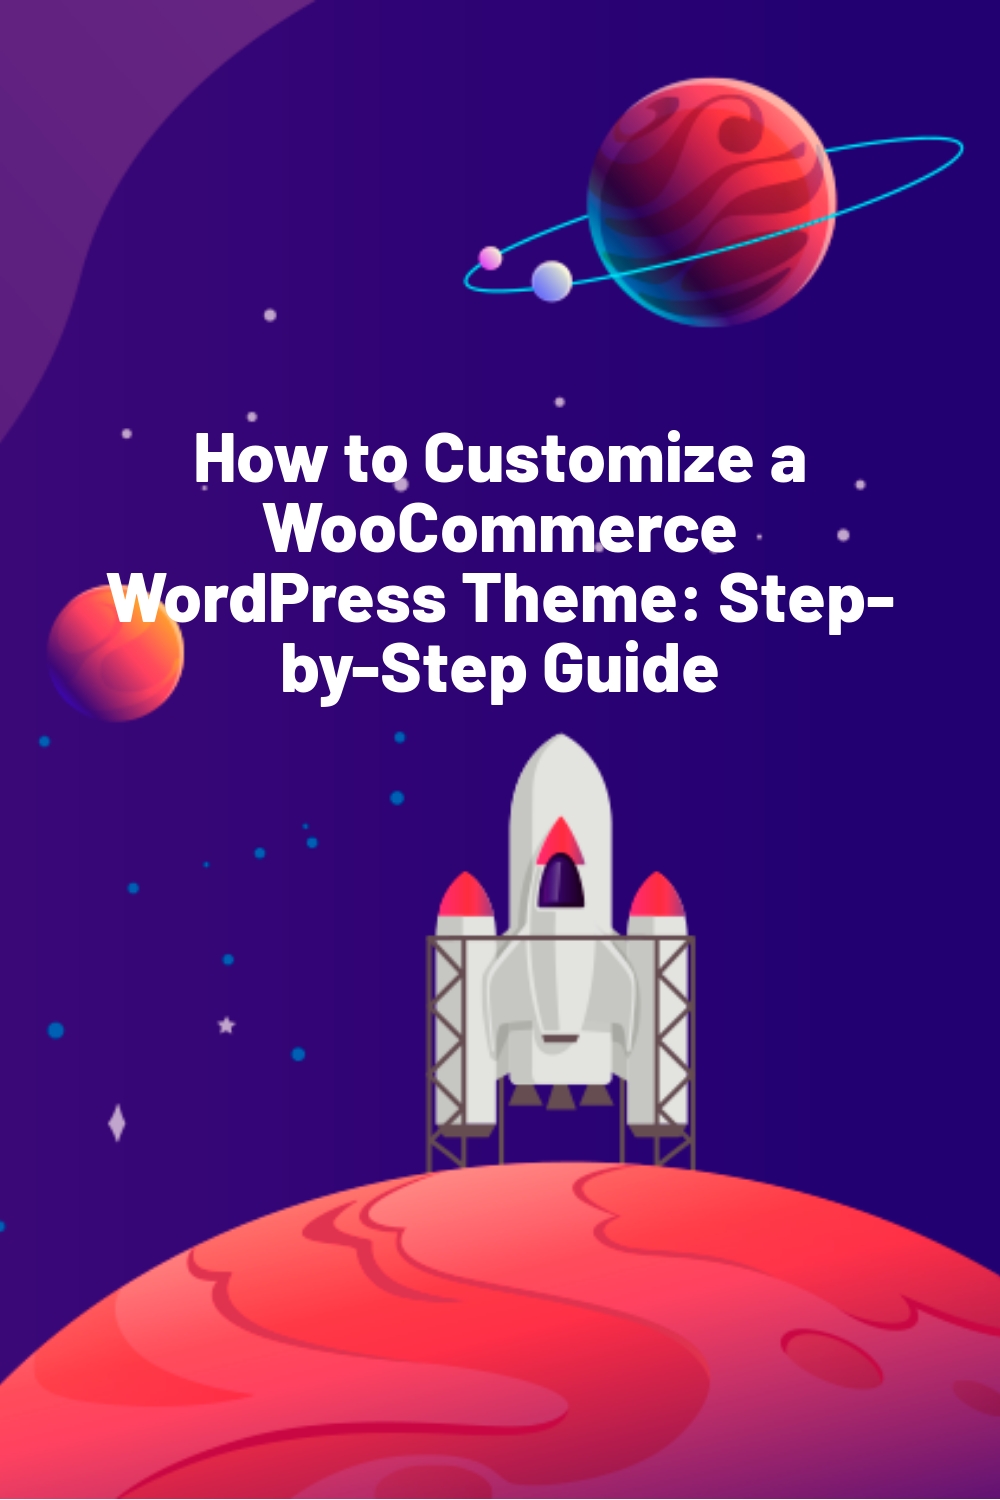 How to Customize a WooCommerce WordPress Theme: Step-by-Step Guide